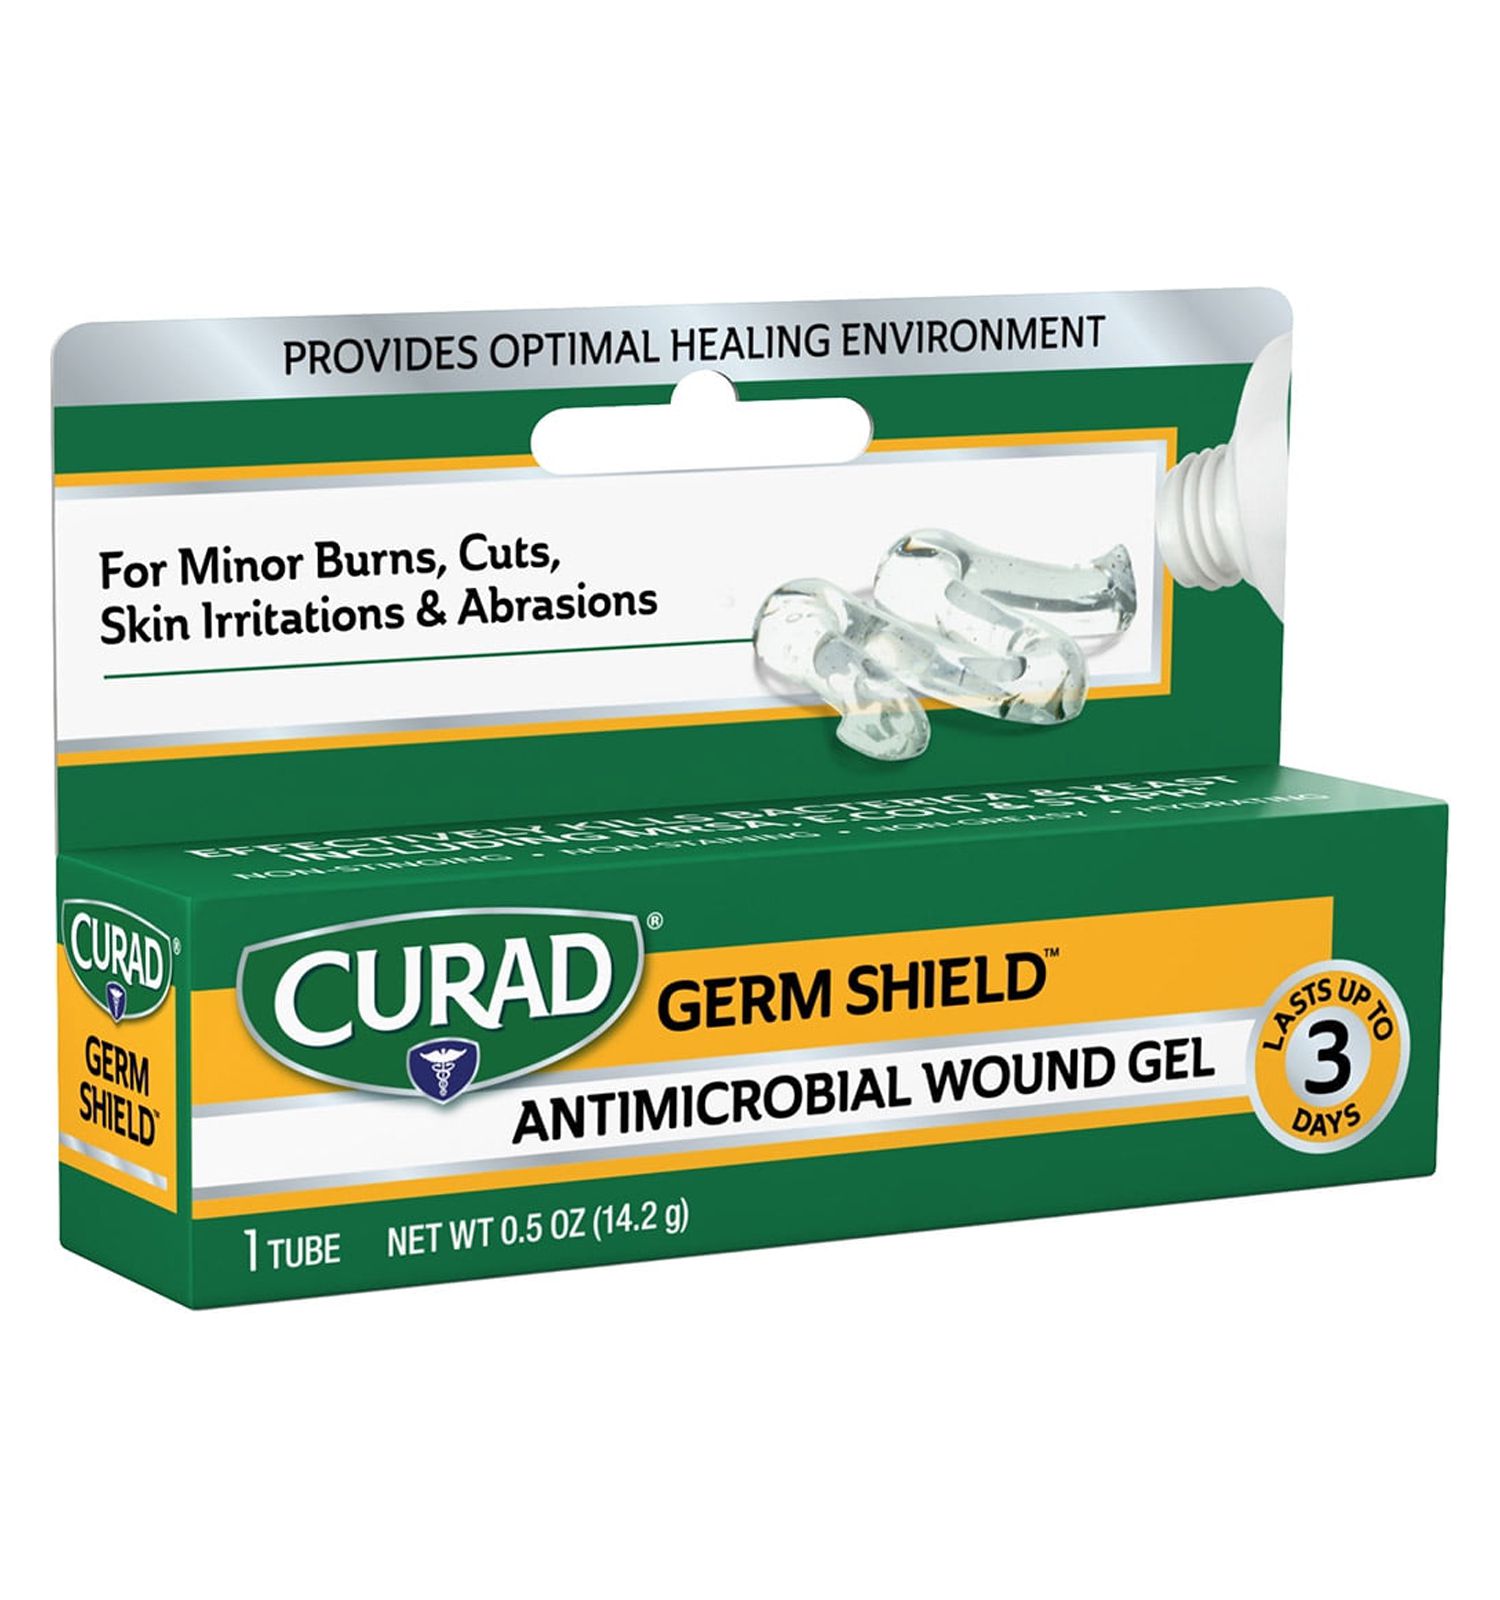 Curad Germ Shield Antimicrobial Silver Wound Gel, For Minor Cuts, Scrapes and Burns, 0.5 Oz Tube, 1 Count - image 1 of 5